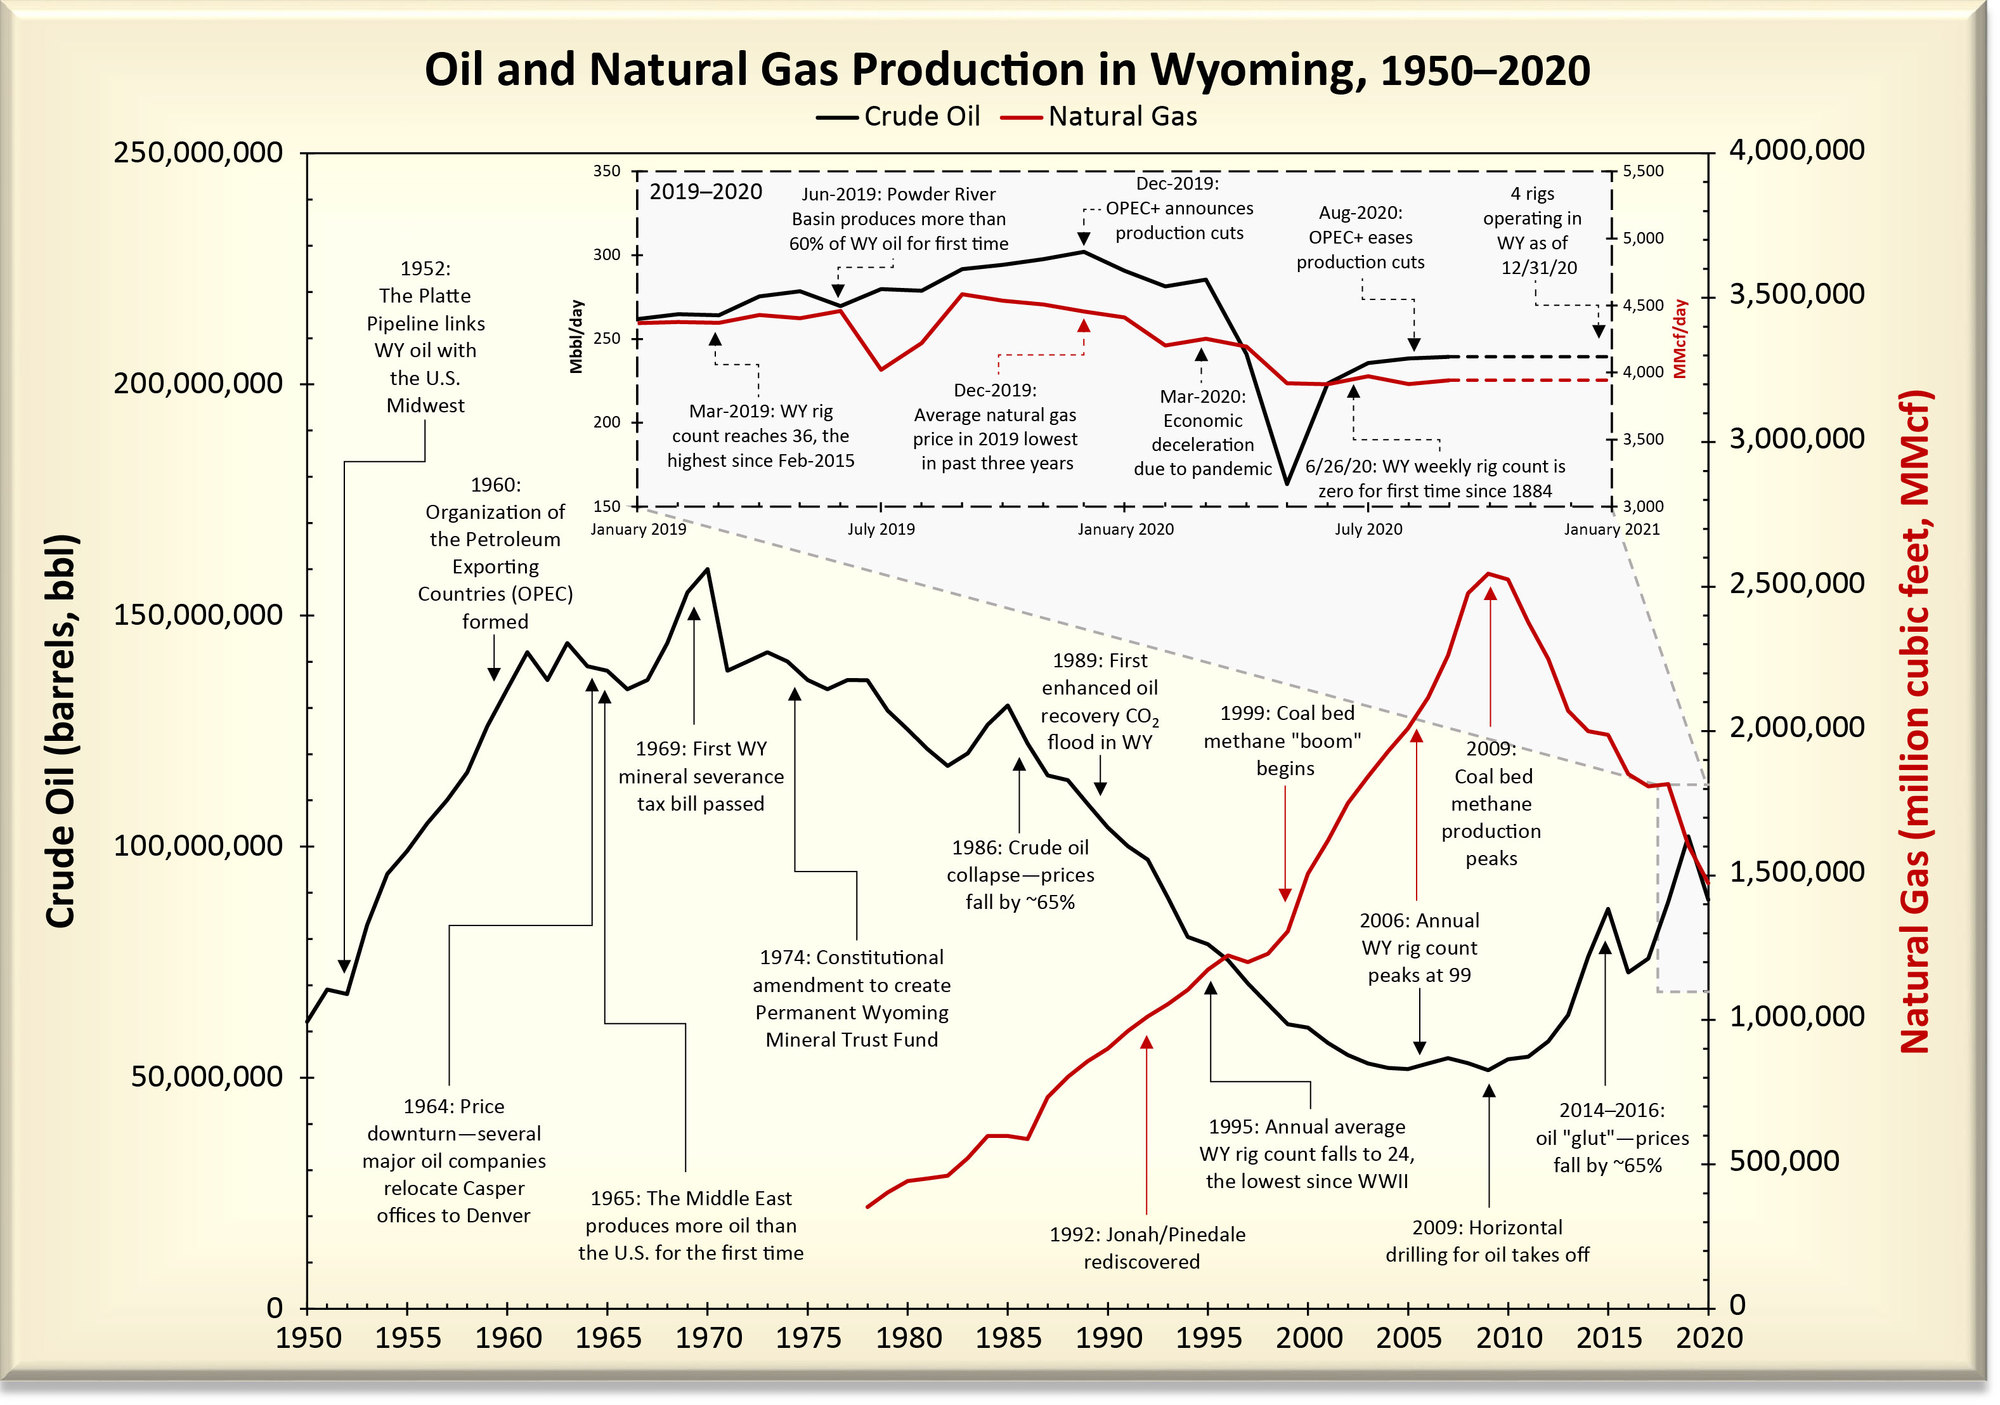 Wyoming Oil and Gas Summary Report 